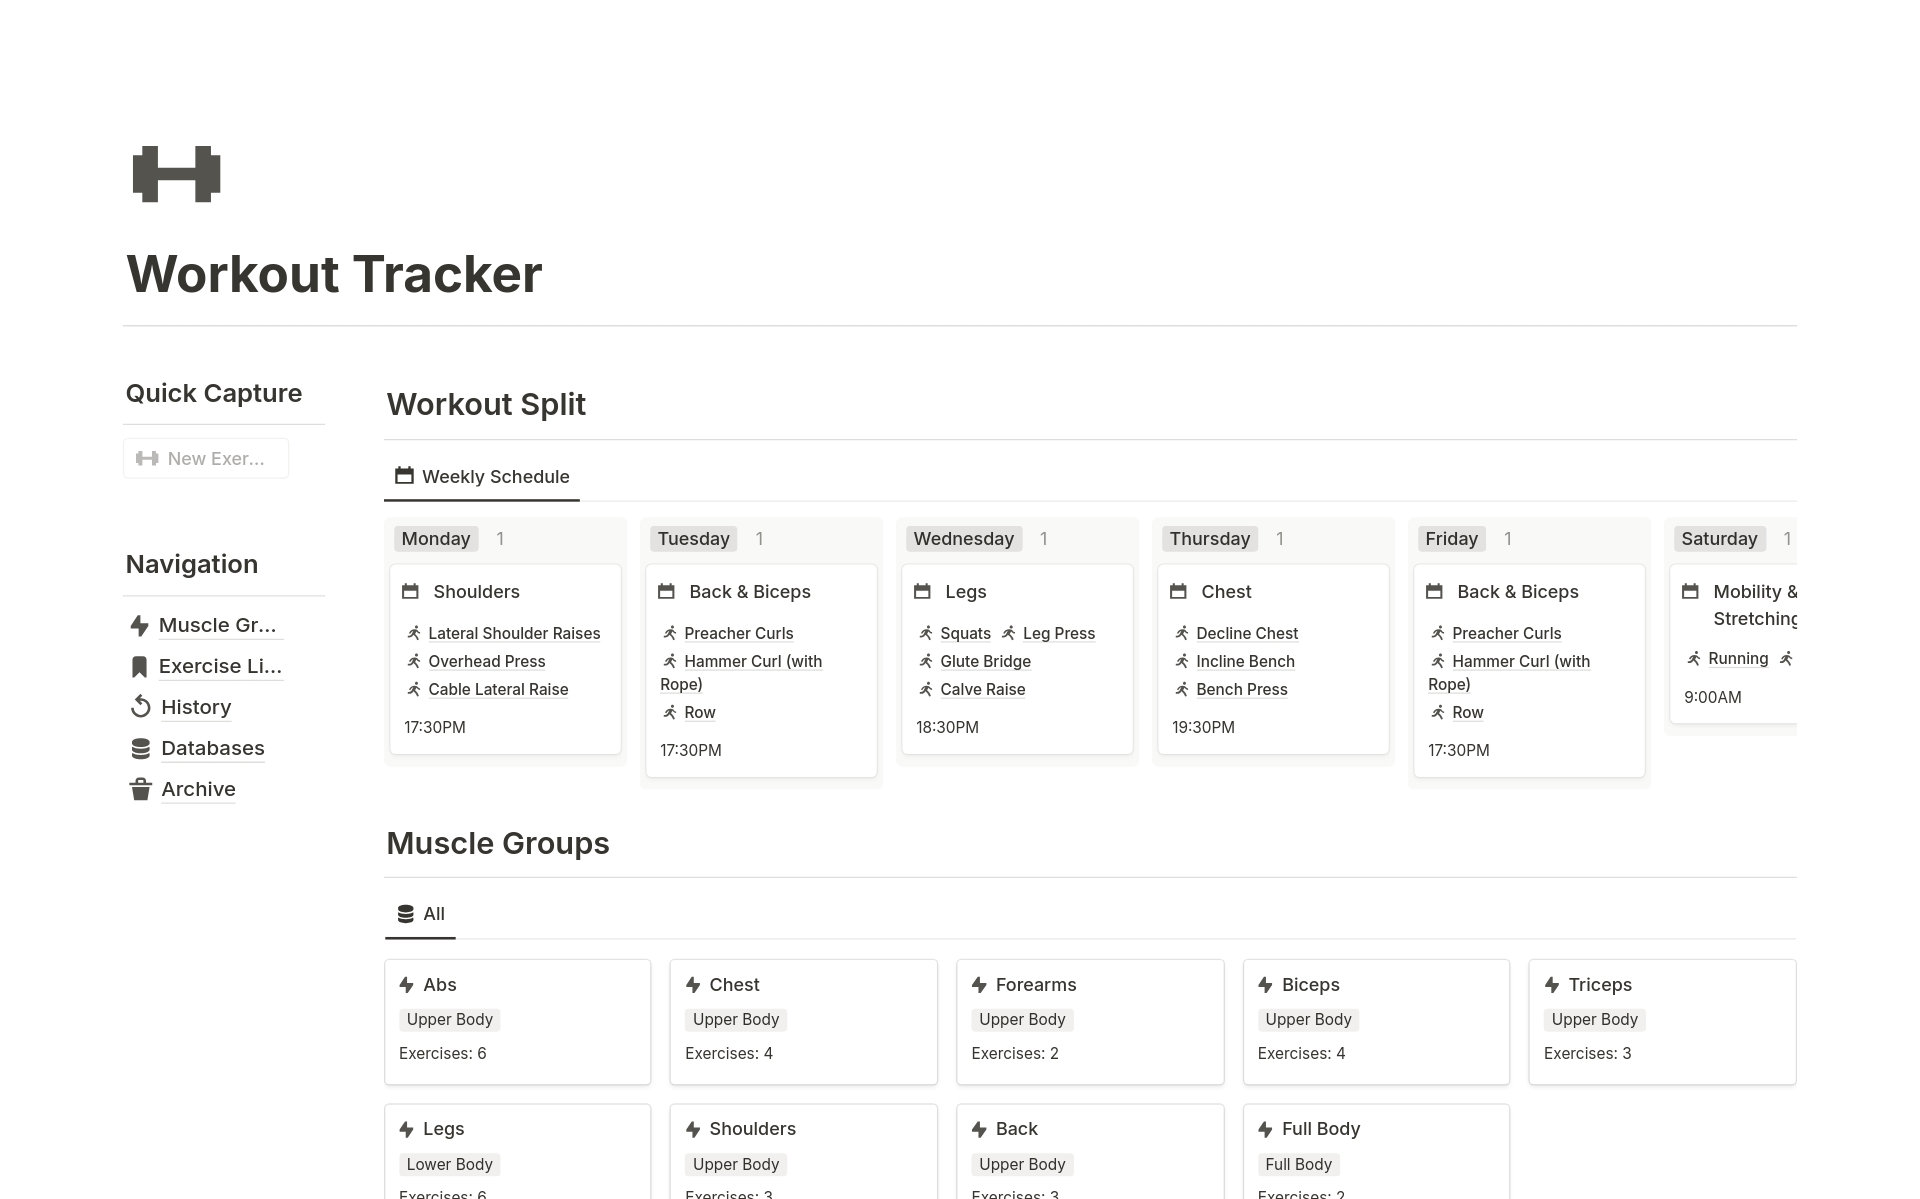  Our Workout Tracker helps you craft personalised workout routines, allowing flexibility for any desired duration. Track exercises, sets, reps, and weights effortlessly to achieve your fitness milestones.